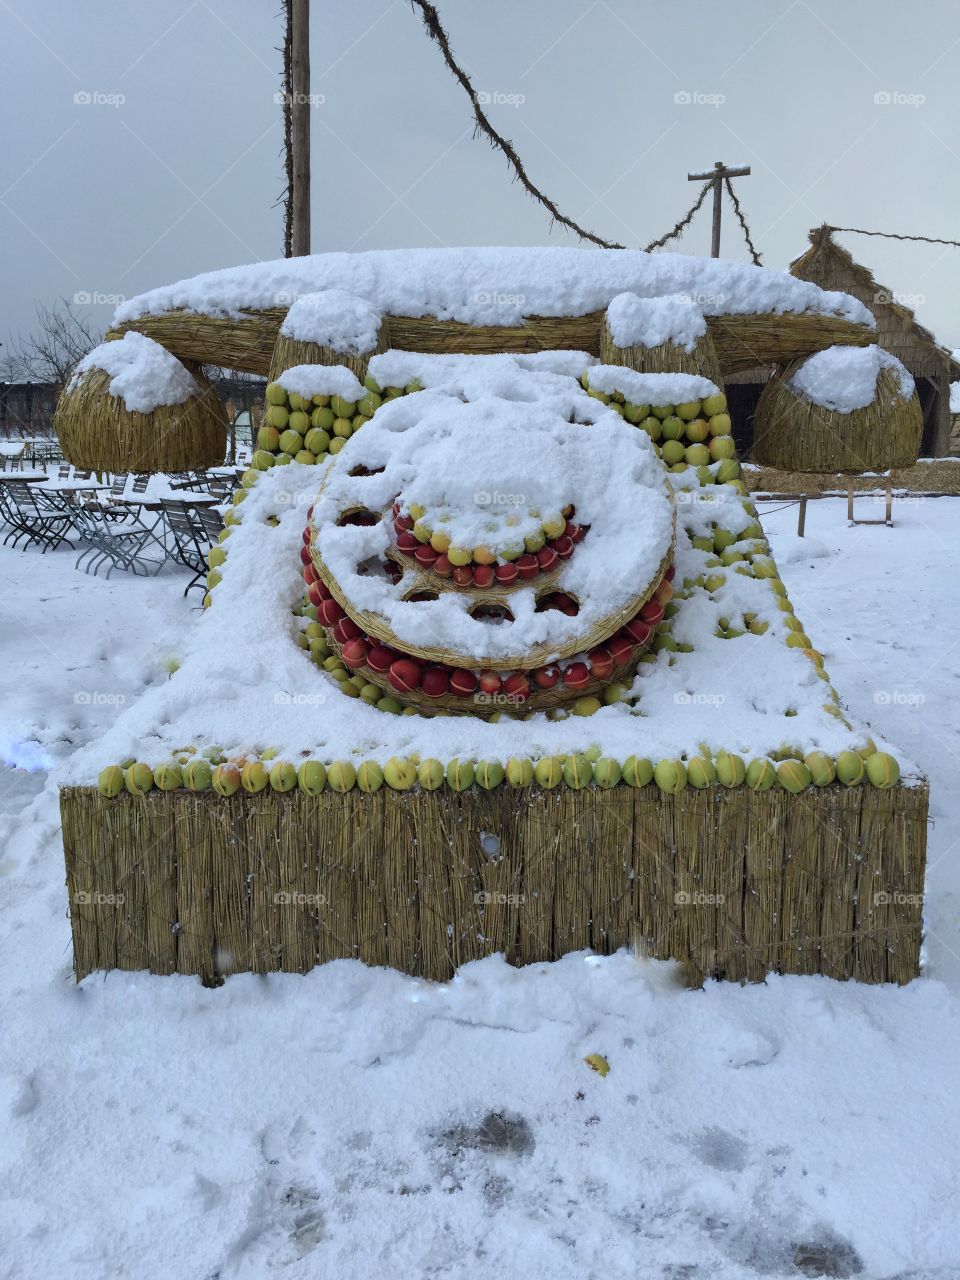 In case you have lost your mobile phone - don't worry, there is a substitute 😊 Huge telephone made of straw, Apples and snow - seen on our winter walk in Rapperswil, Switzerland.